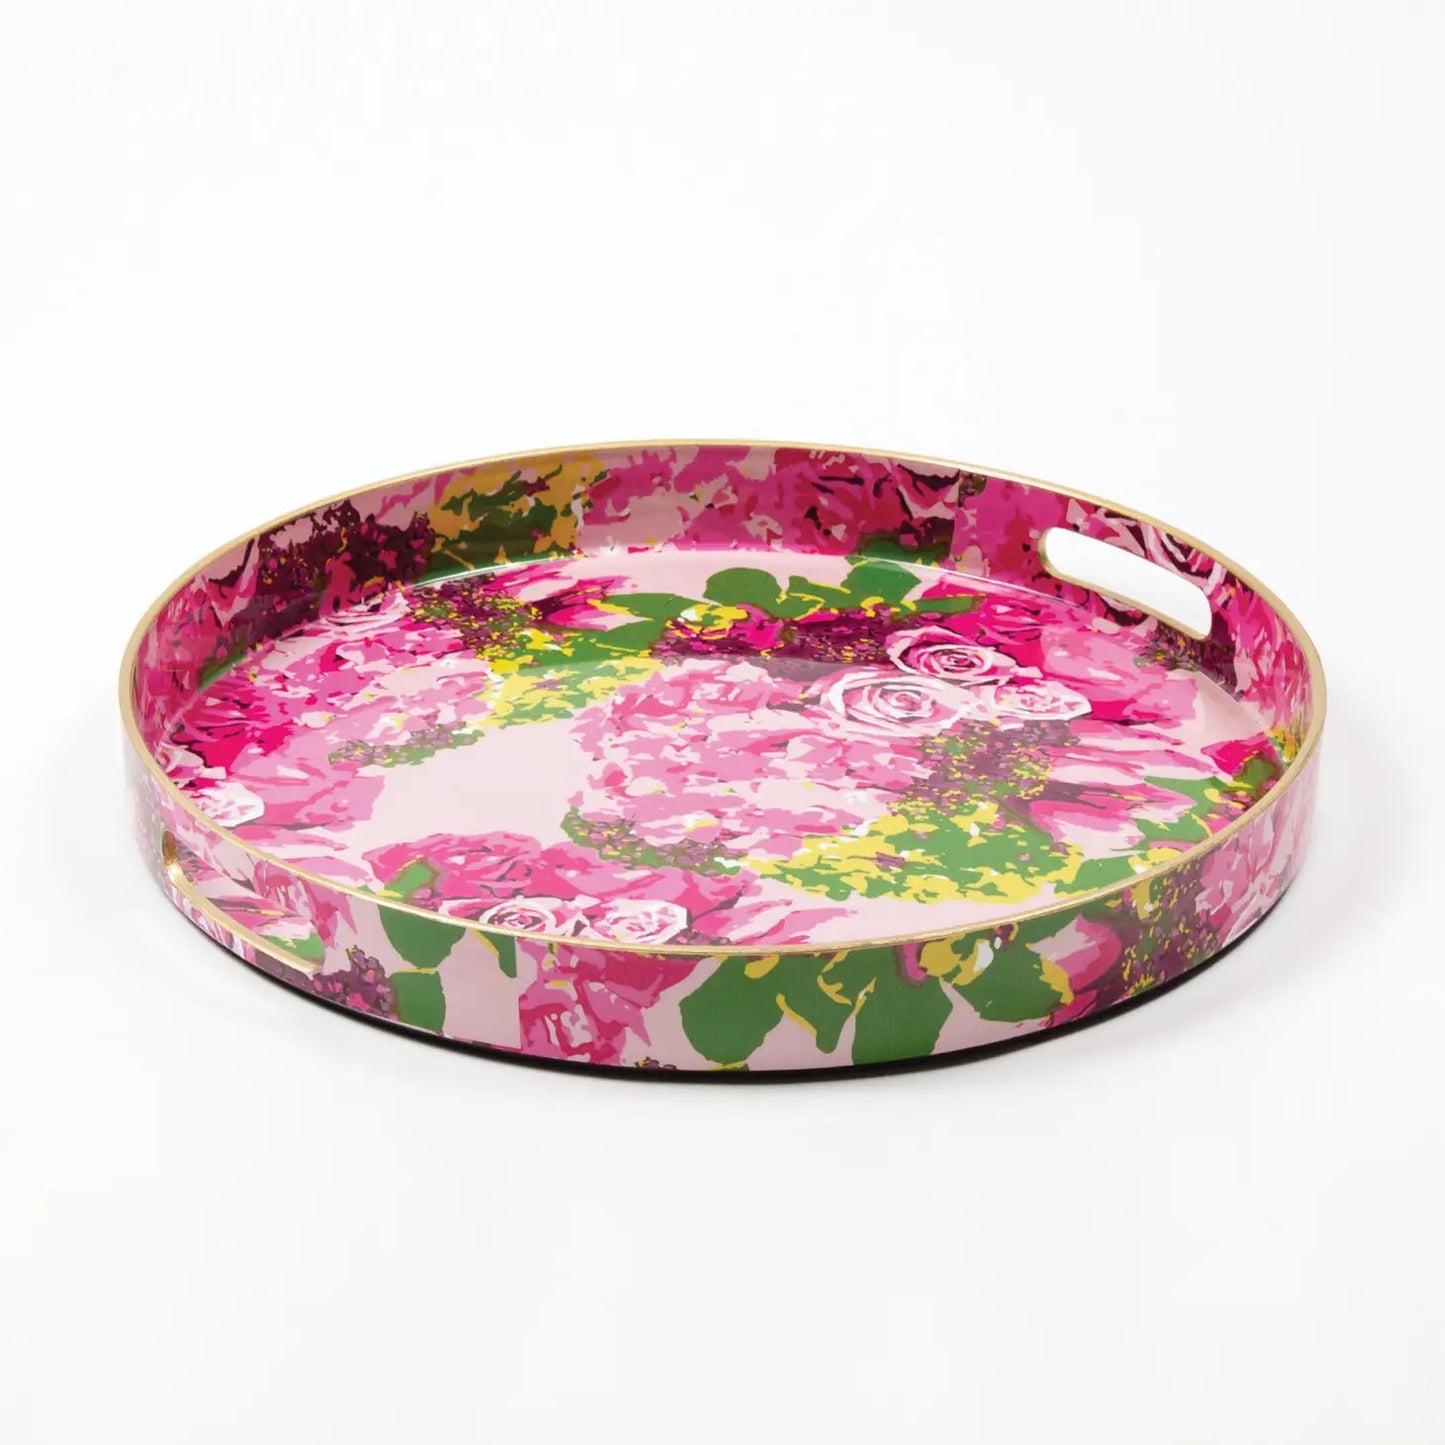 Rose Garden Round Tray - Mindful Living Home